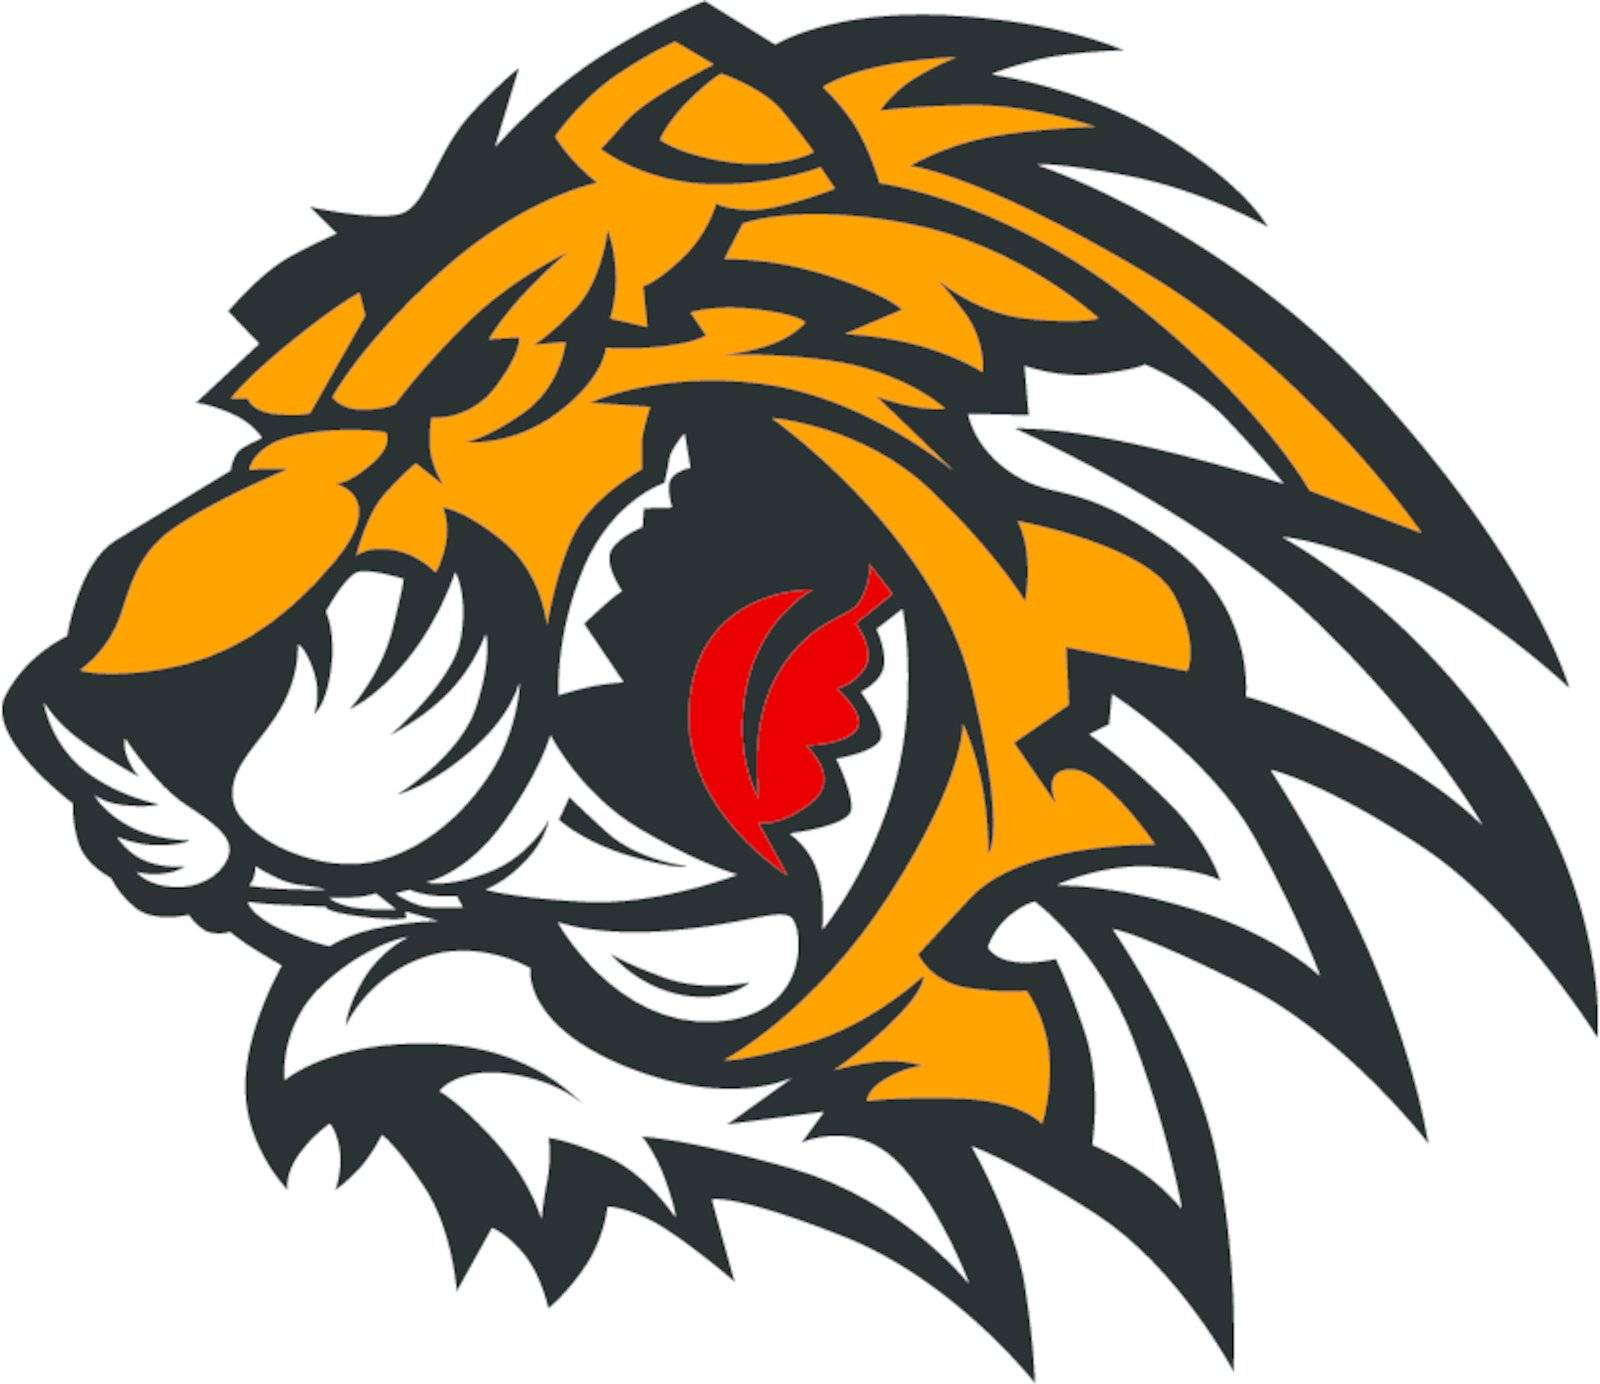 Tiger Mascot Graphic by chromaco